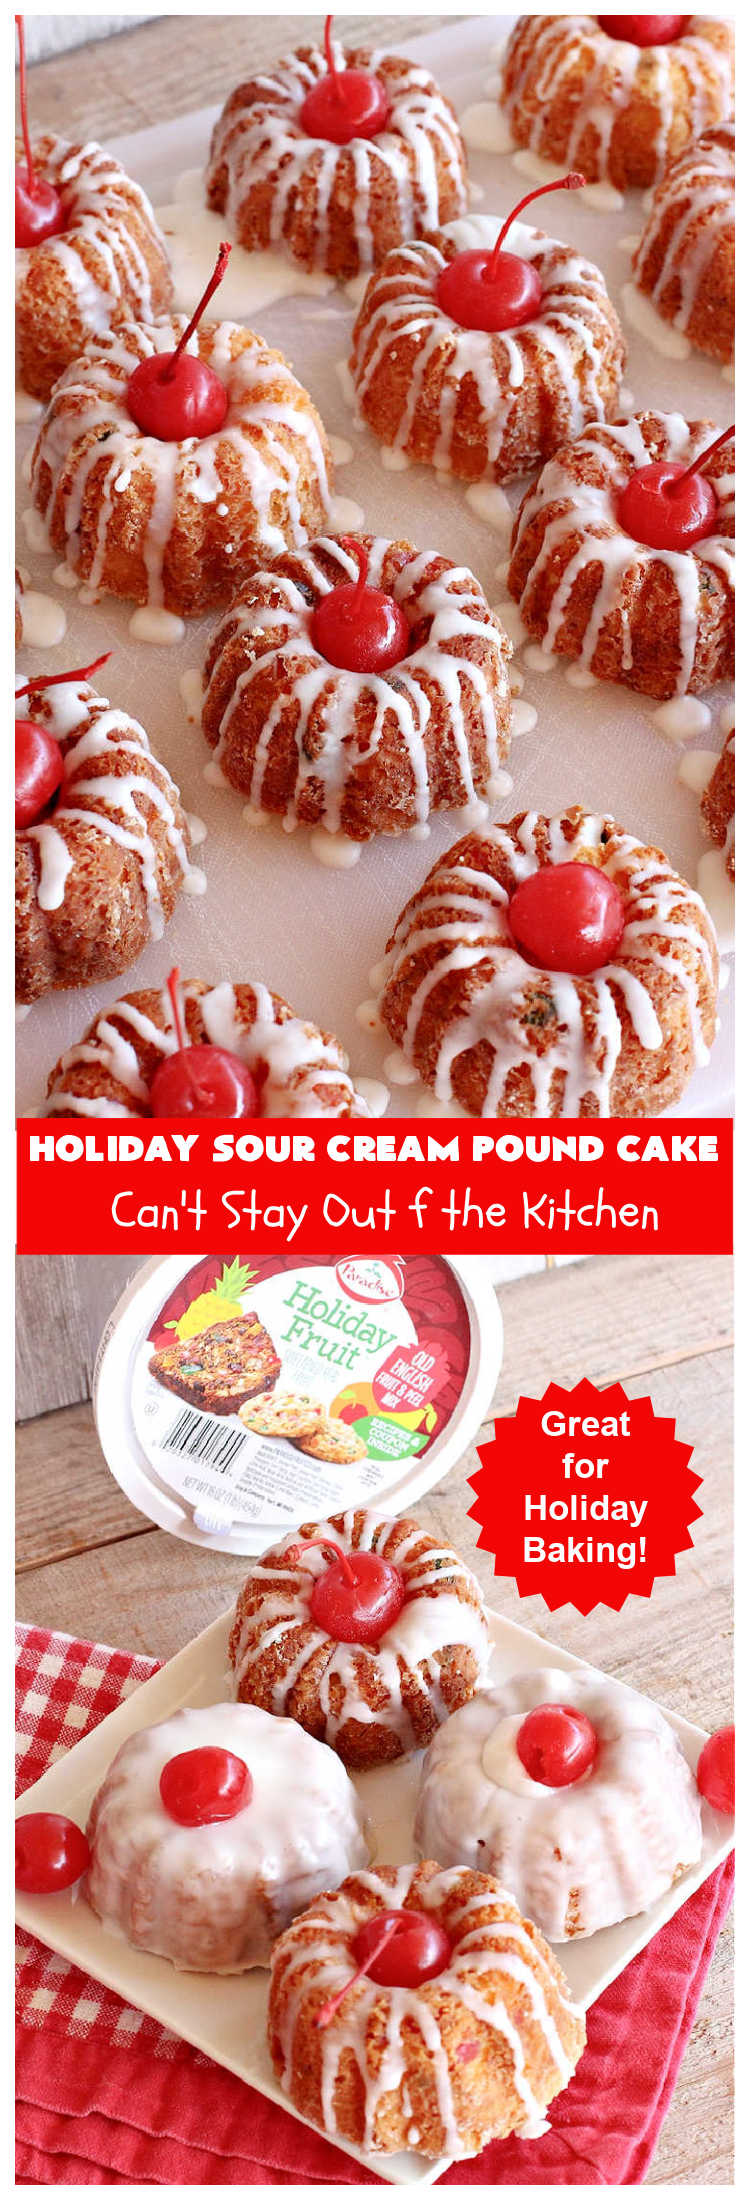 Holiday Sour Cream Pound Cake | Can't Stay Out of the Kitchen